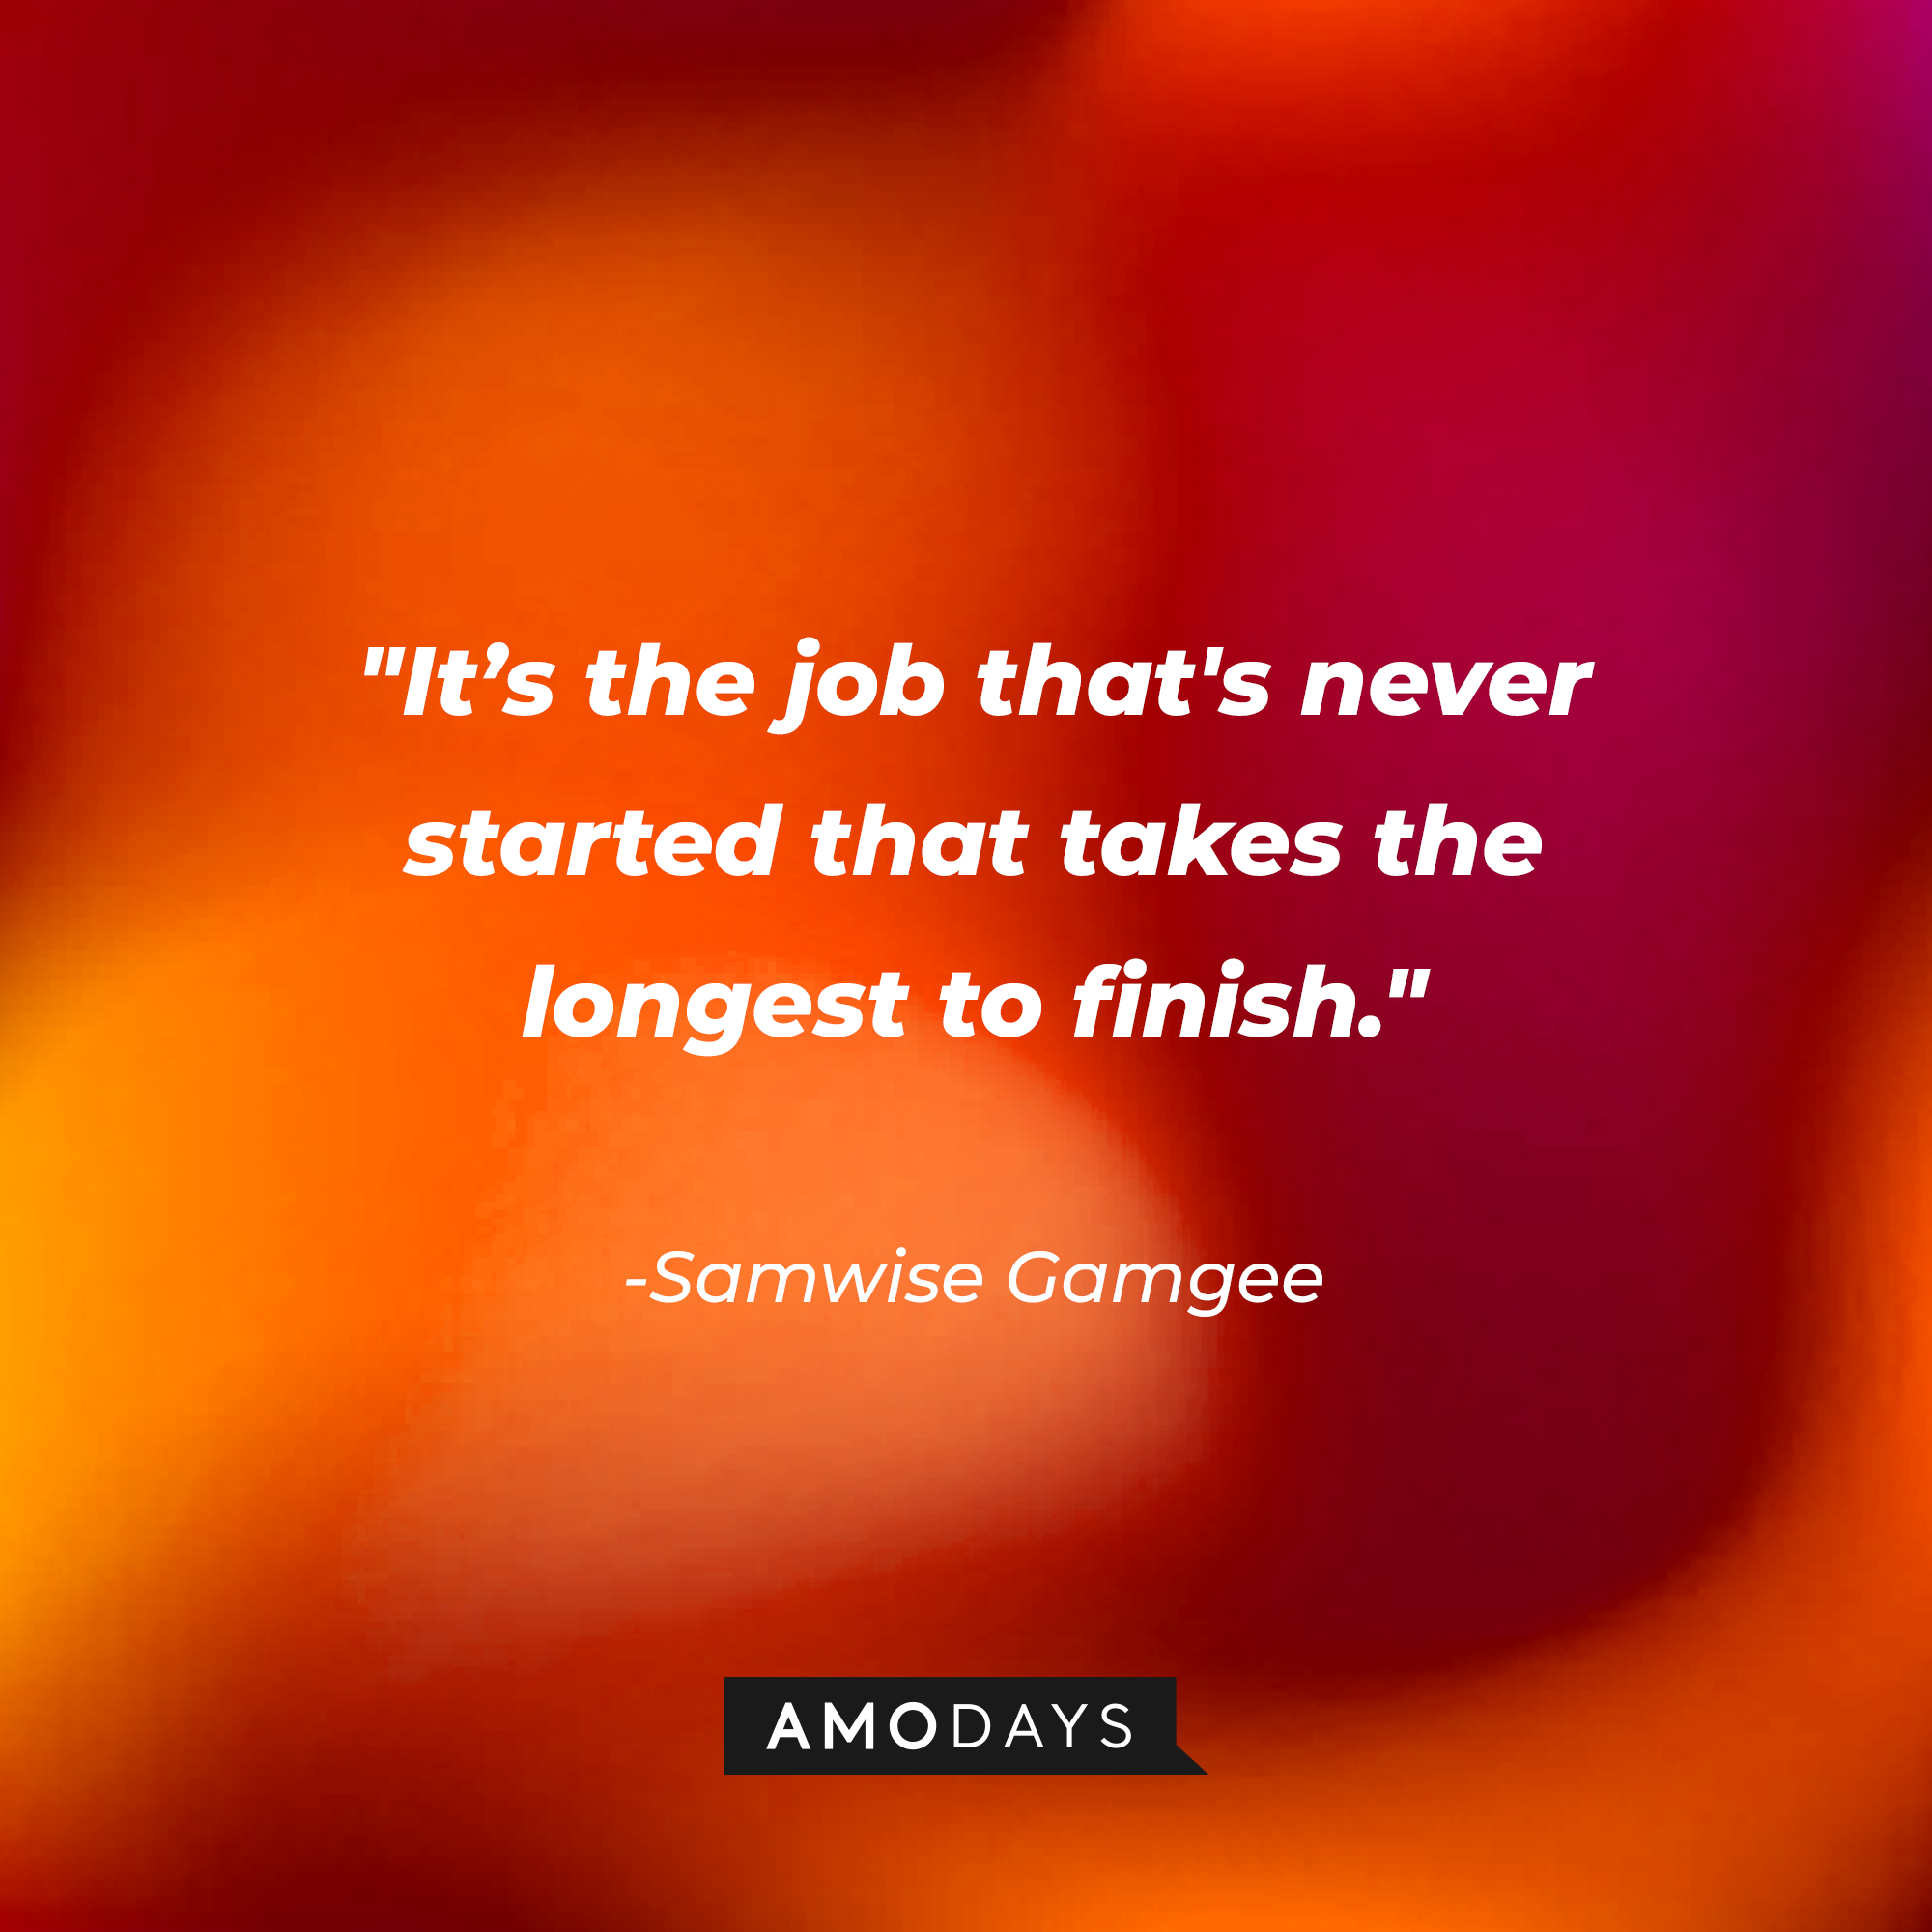 Samwise Gamgee’s quote: “It’s the job that’s never started that takes the longest to finish.”|  Source: AmoDays